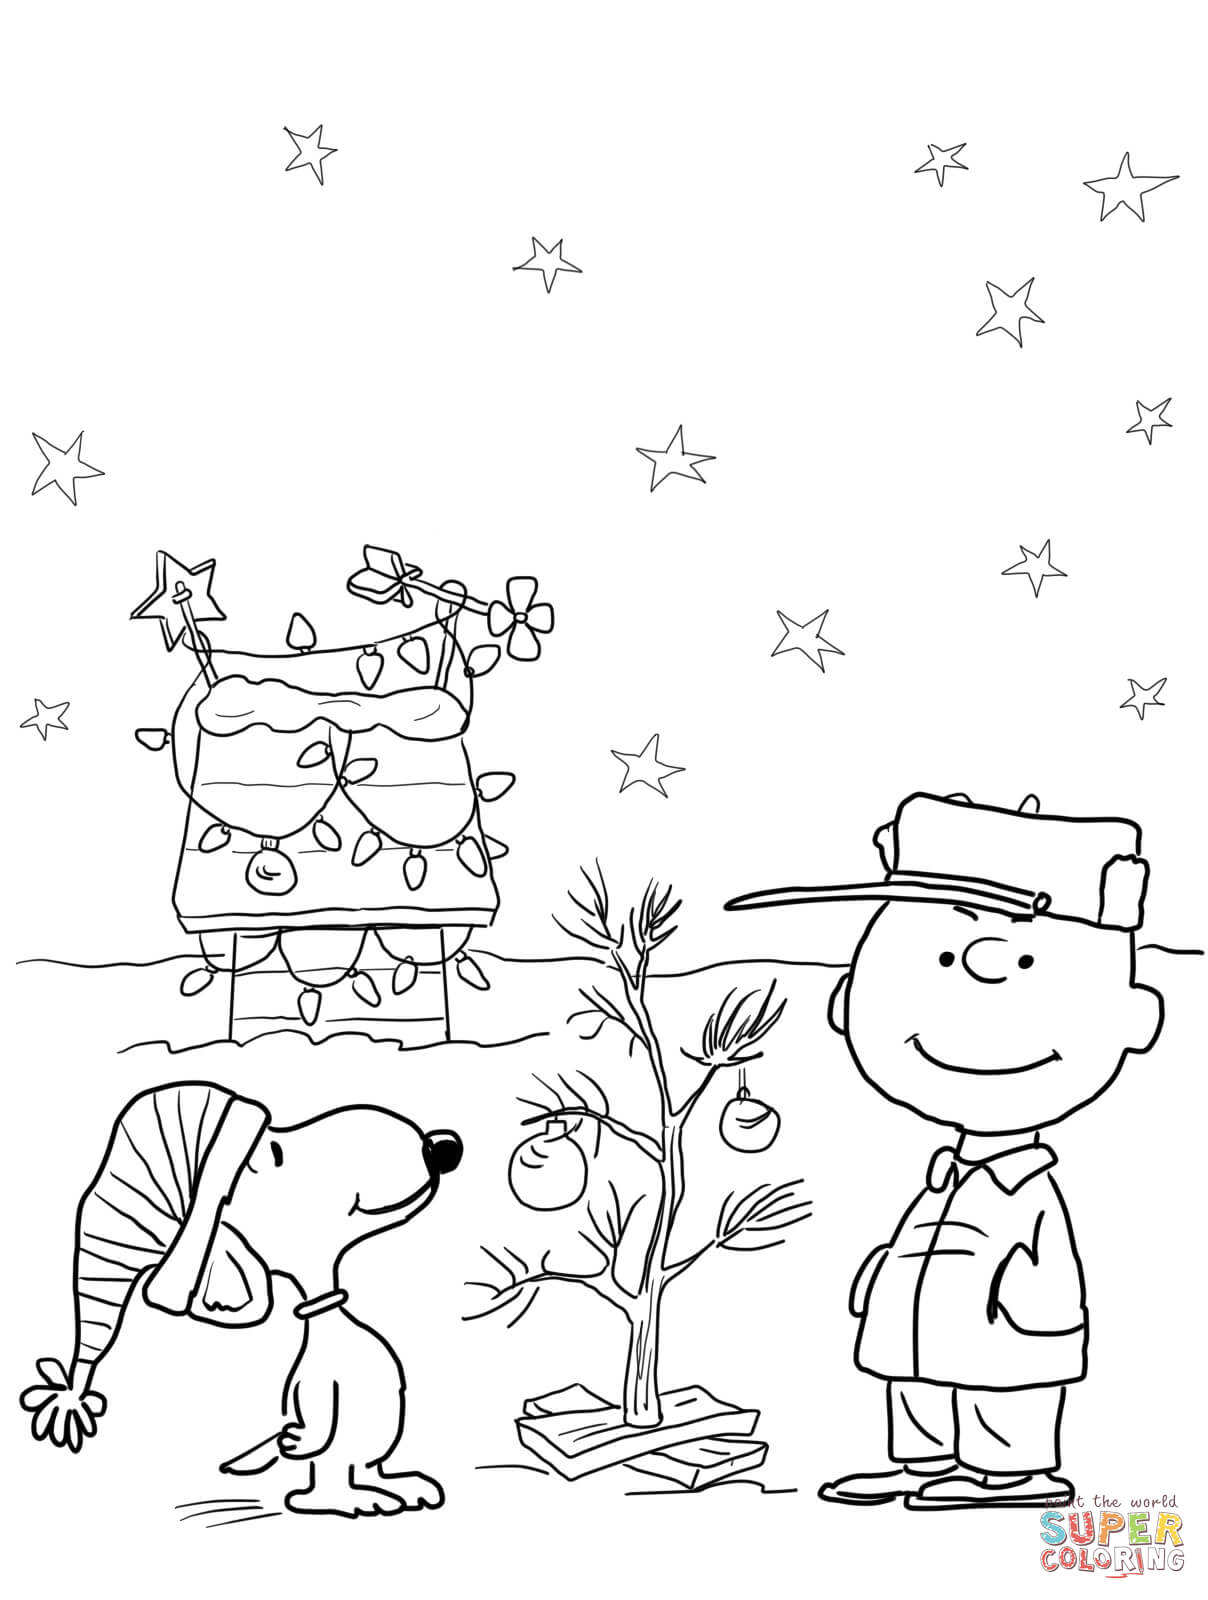 Snoopy Christmas Coloring Pages at GetColorings.com | Free printable